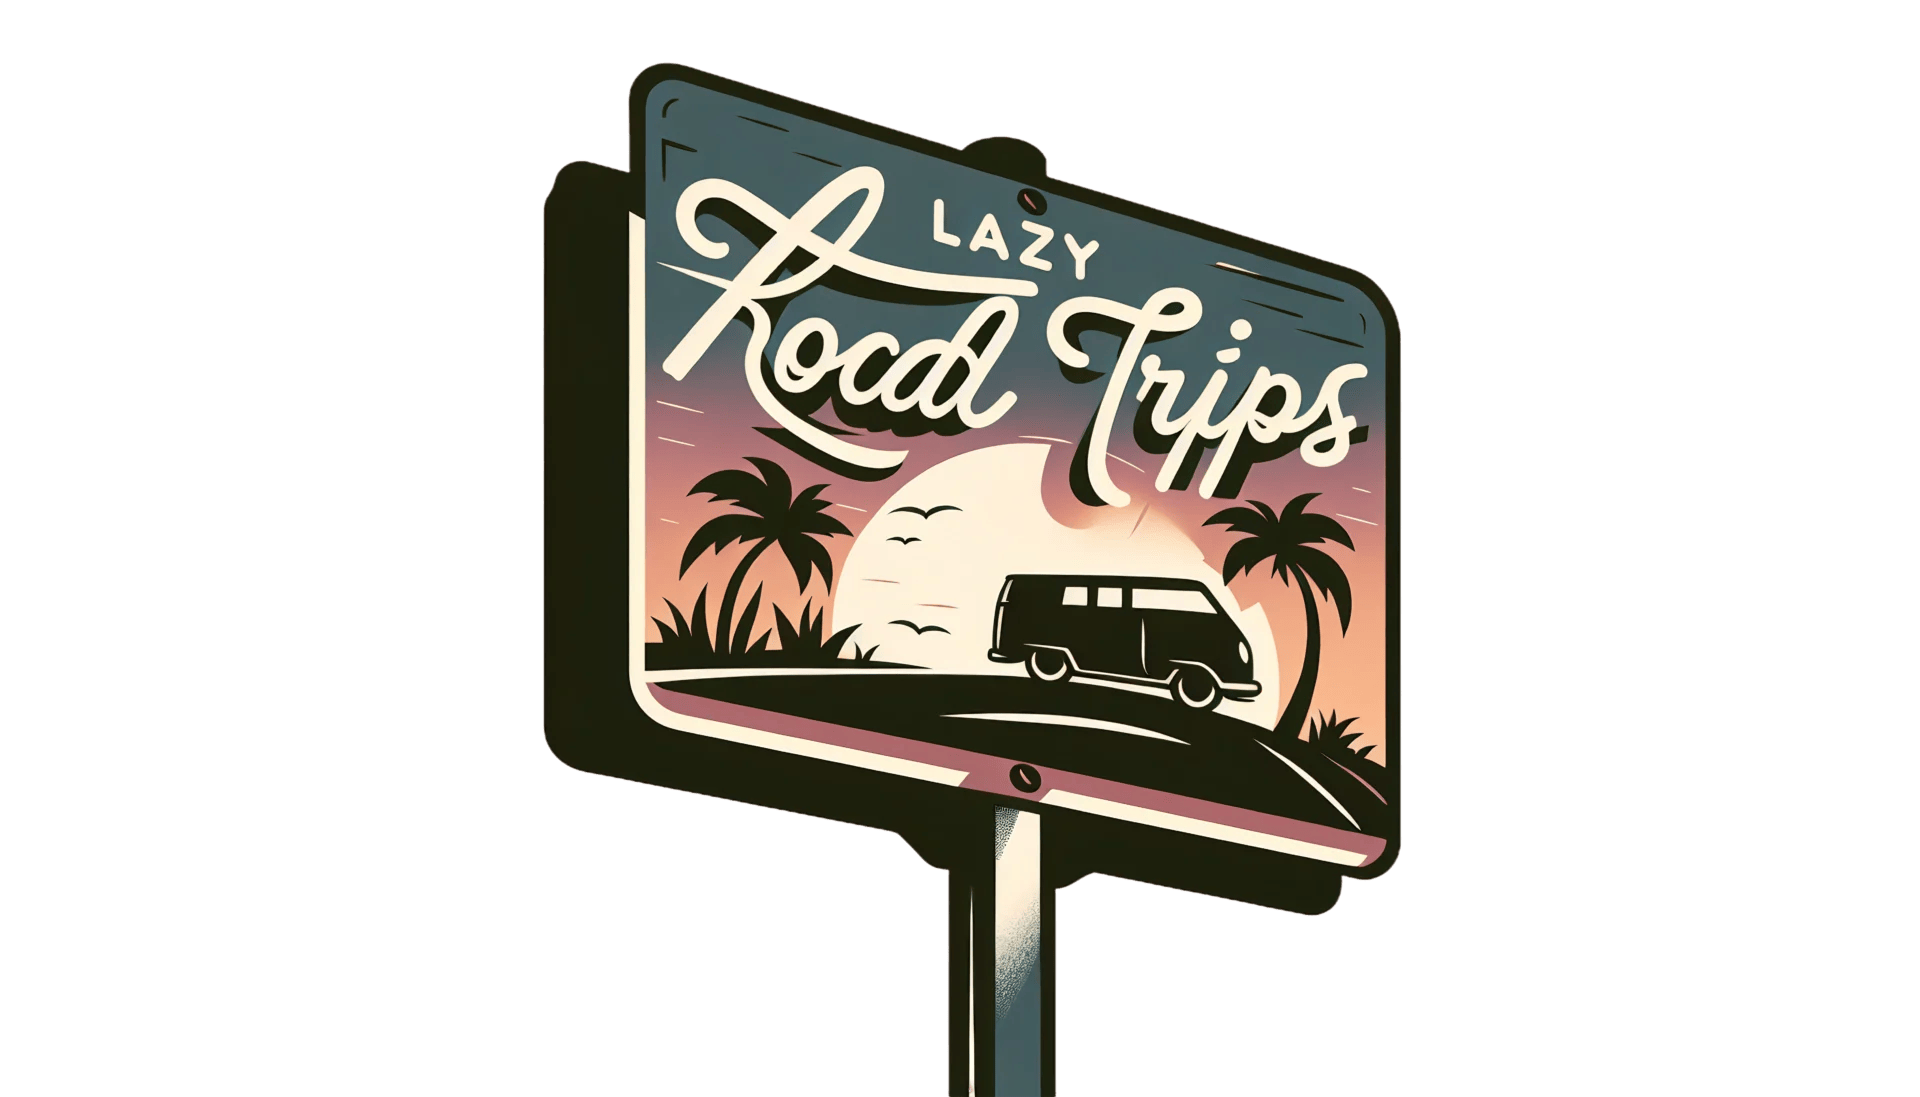 Illuminated signboard with "lazy local trips" text and an illustration of a van and palm trees against a sunset background.